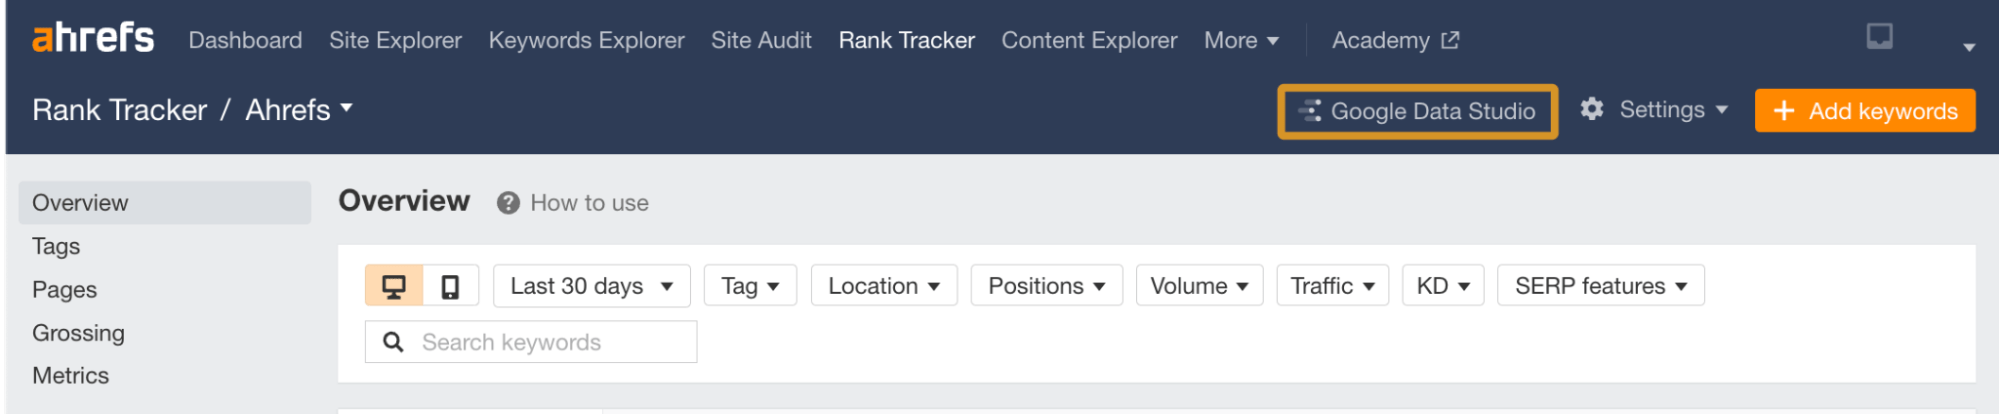 Overview page, via Ahrefs' Rank Tracker
